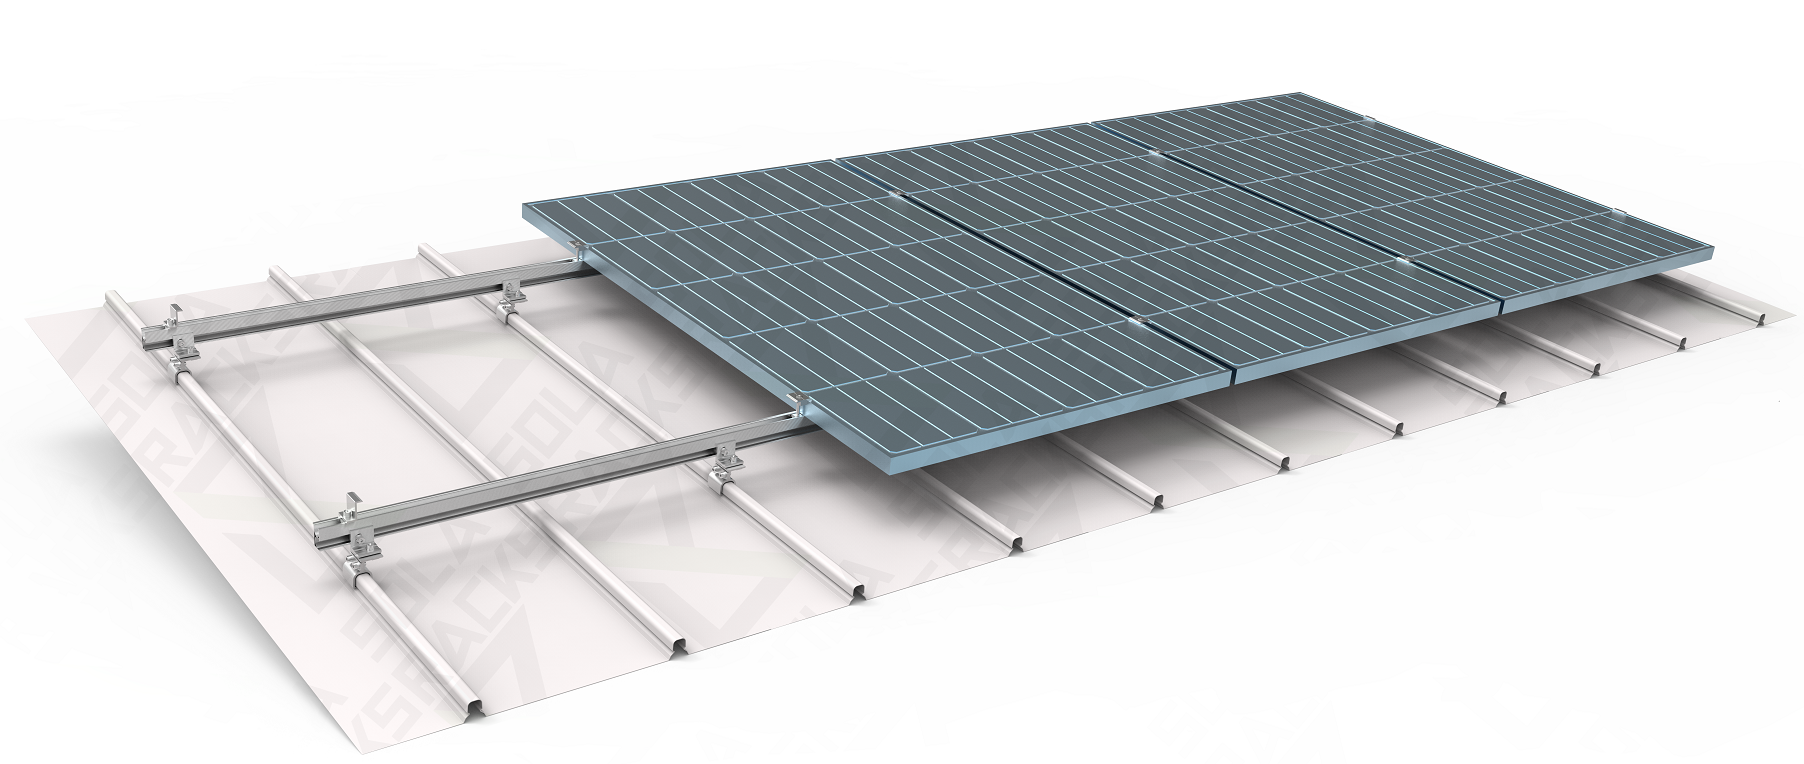 Solaracks, Standing Seam Roof Mounting System – Claw